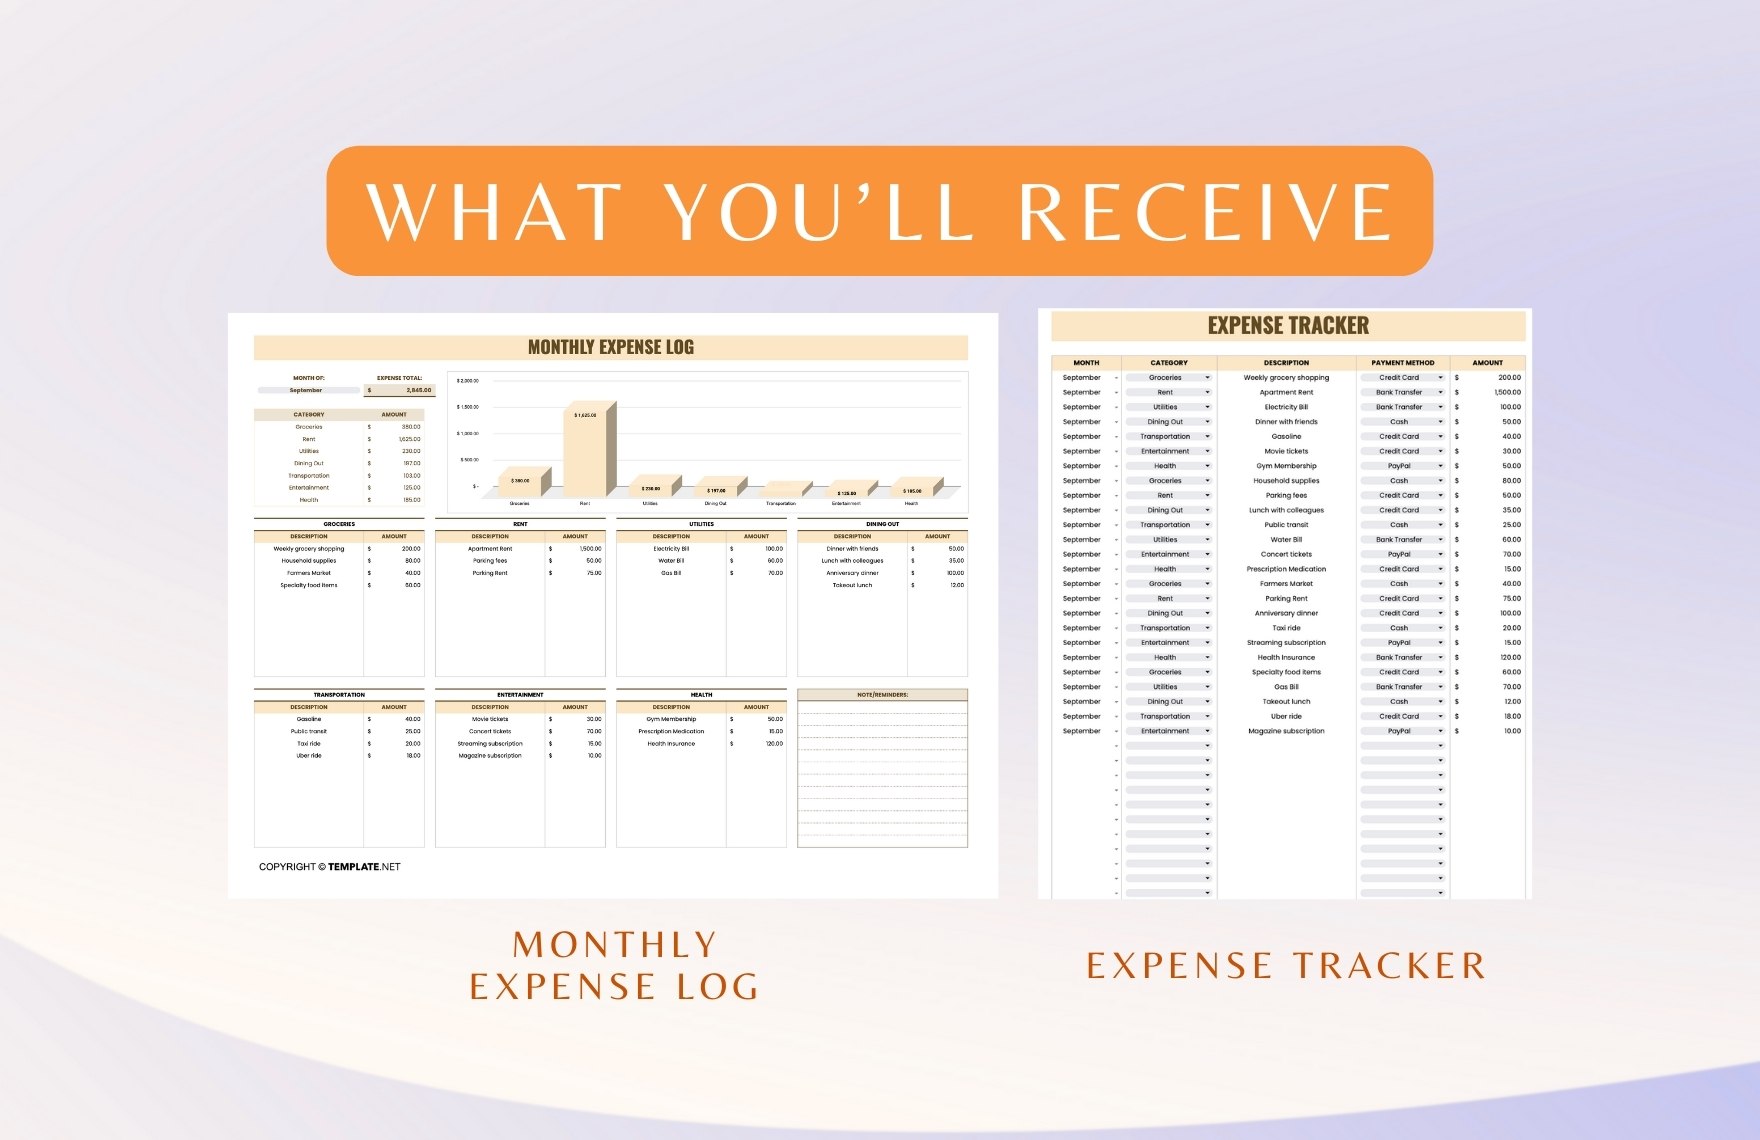 Monthly Expense Log Template